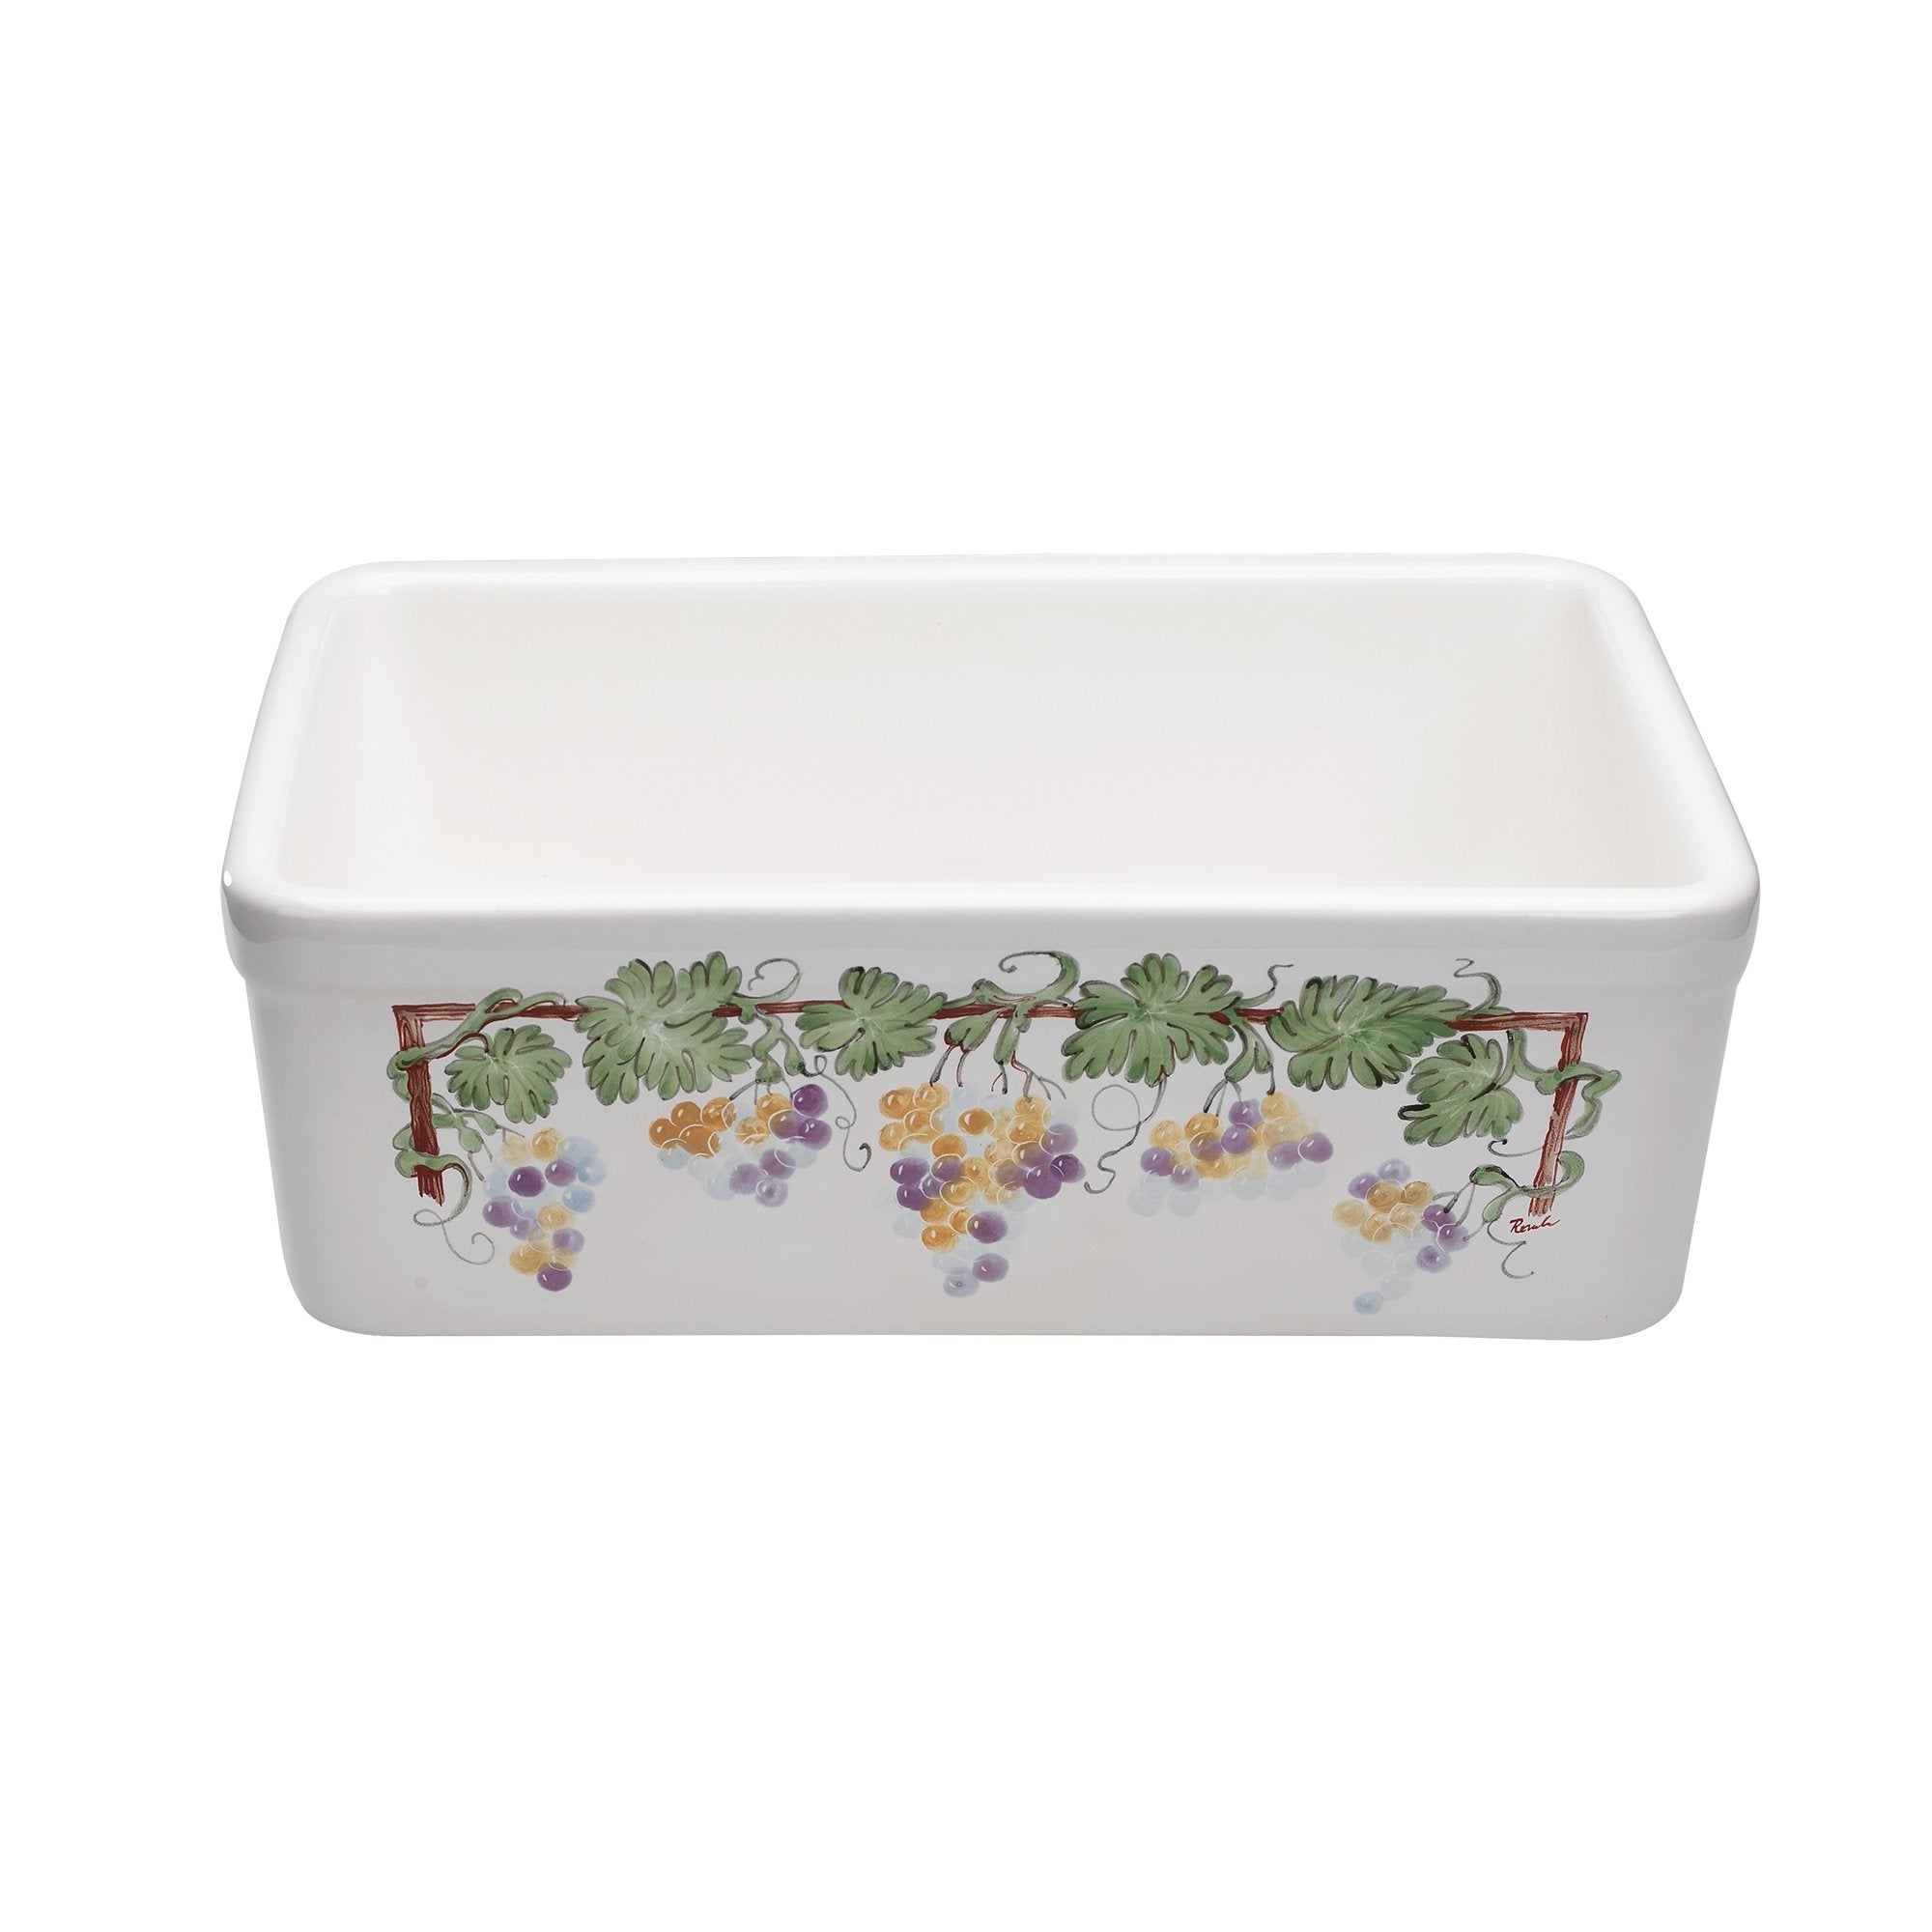 26" Single bowl hand-painted fireclay kitchen sink